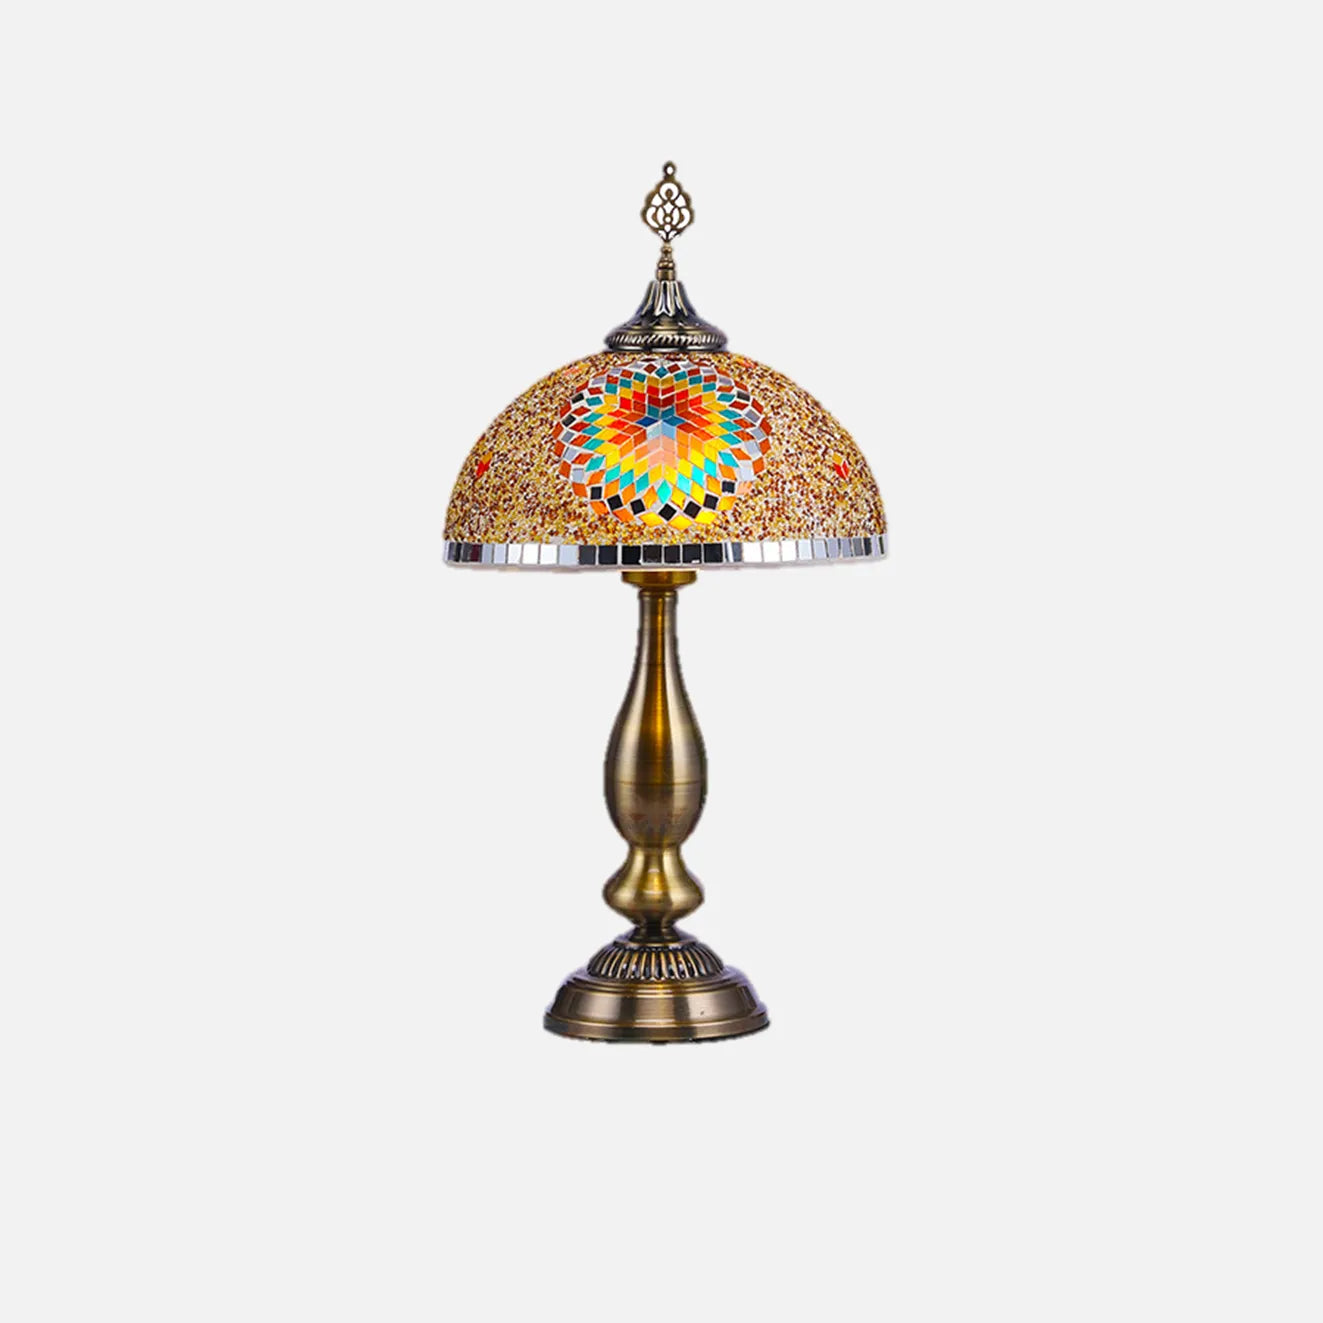 handmade-bohemian-classic-vintage-style-table-warm-light-lamp-handcrafted-home-decor-multi-colour